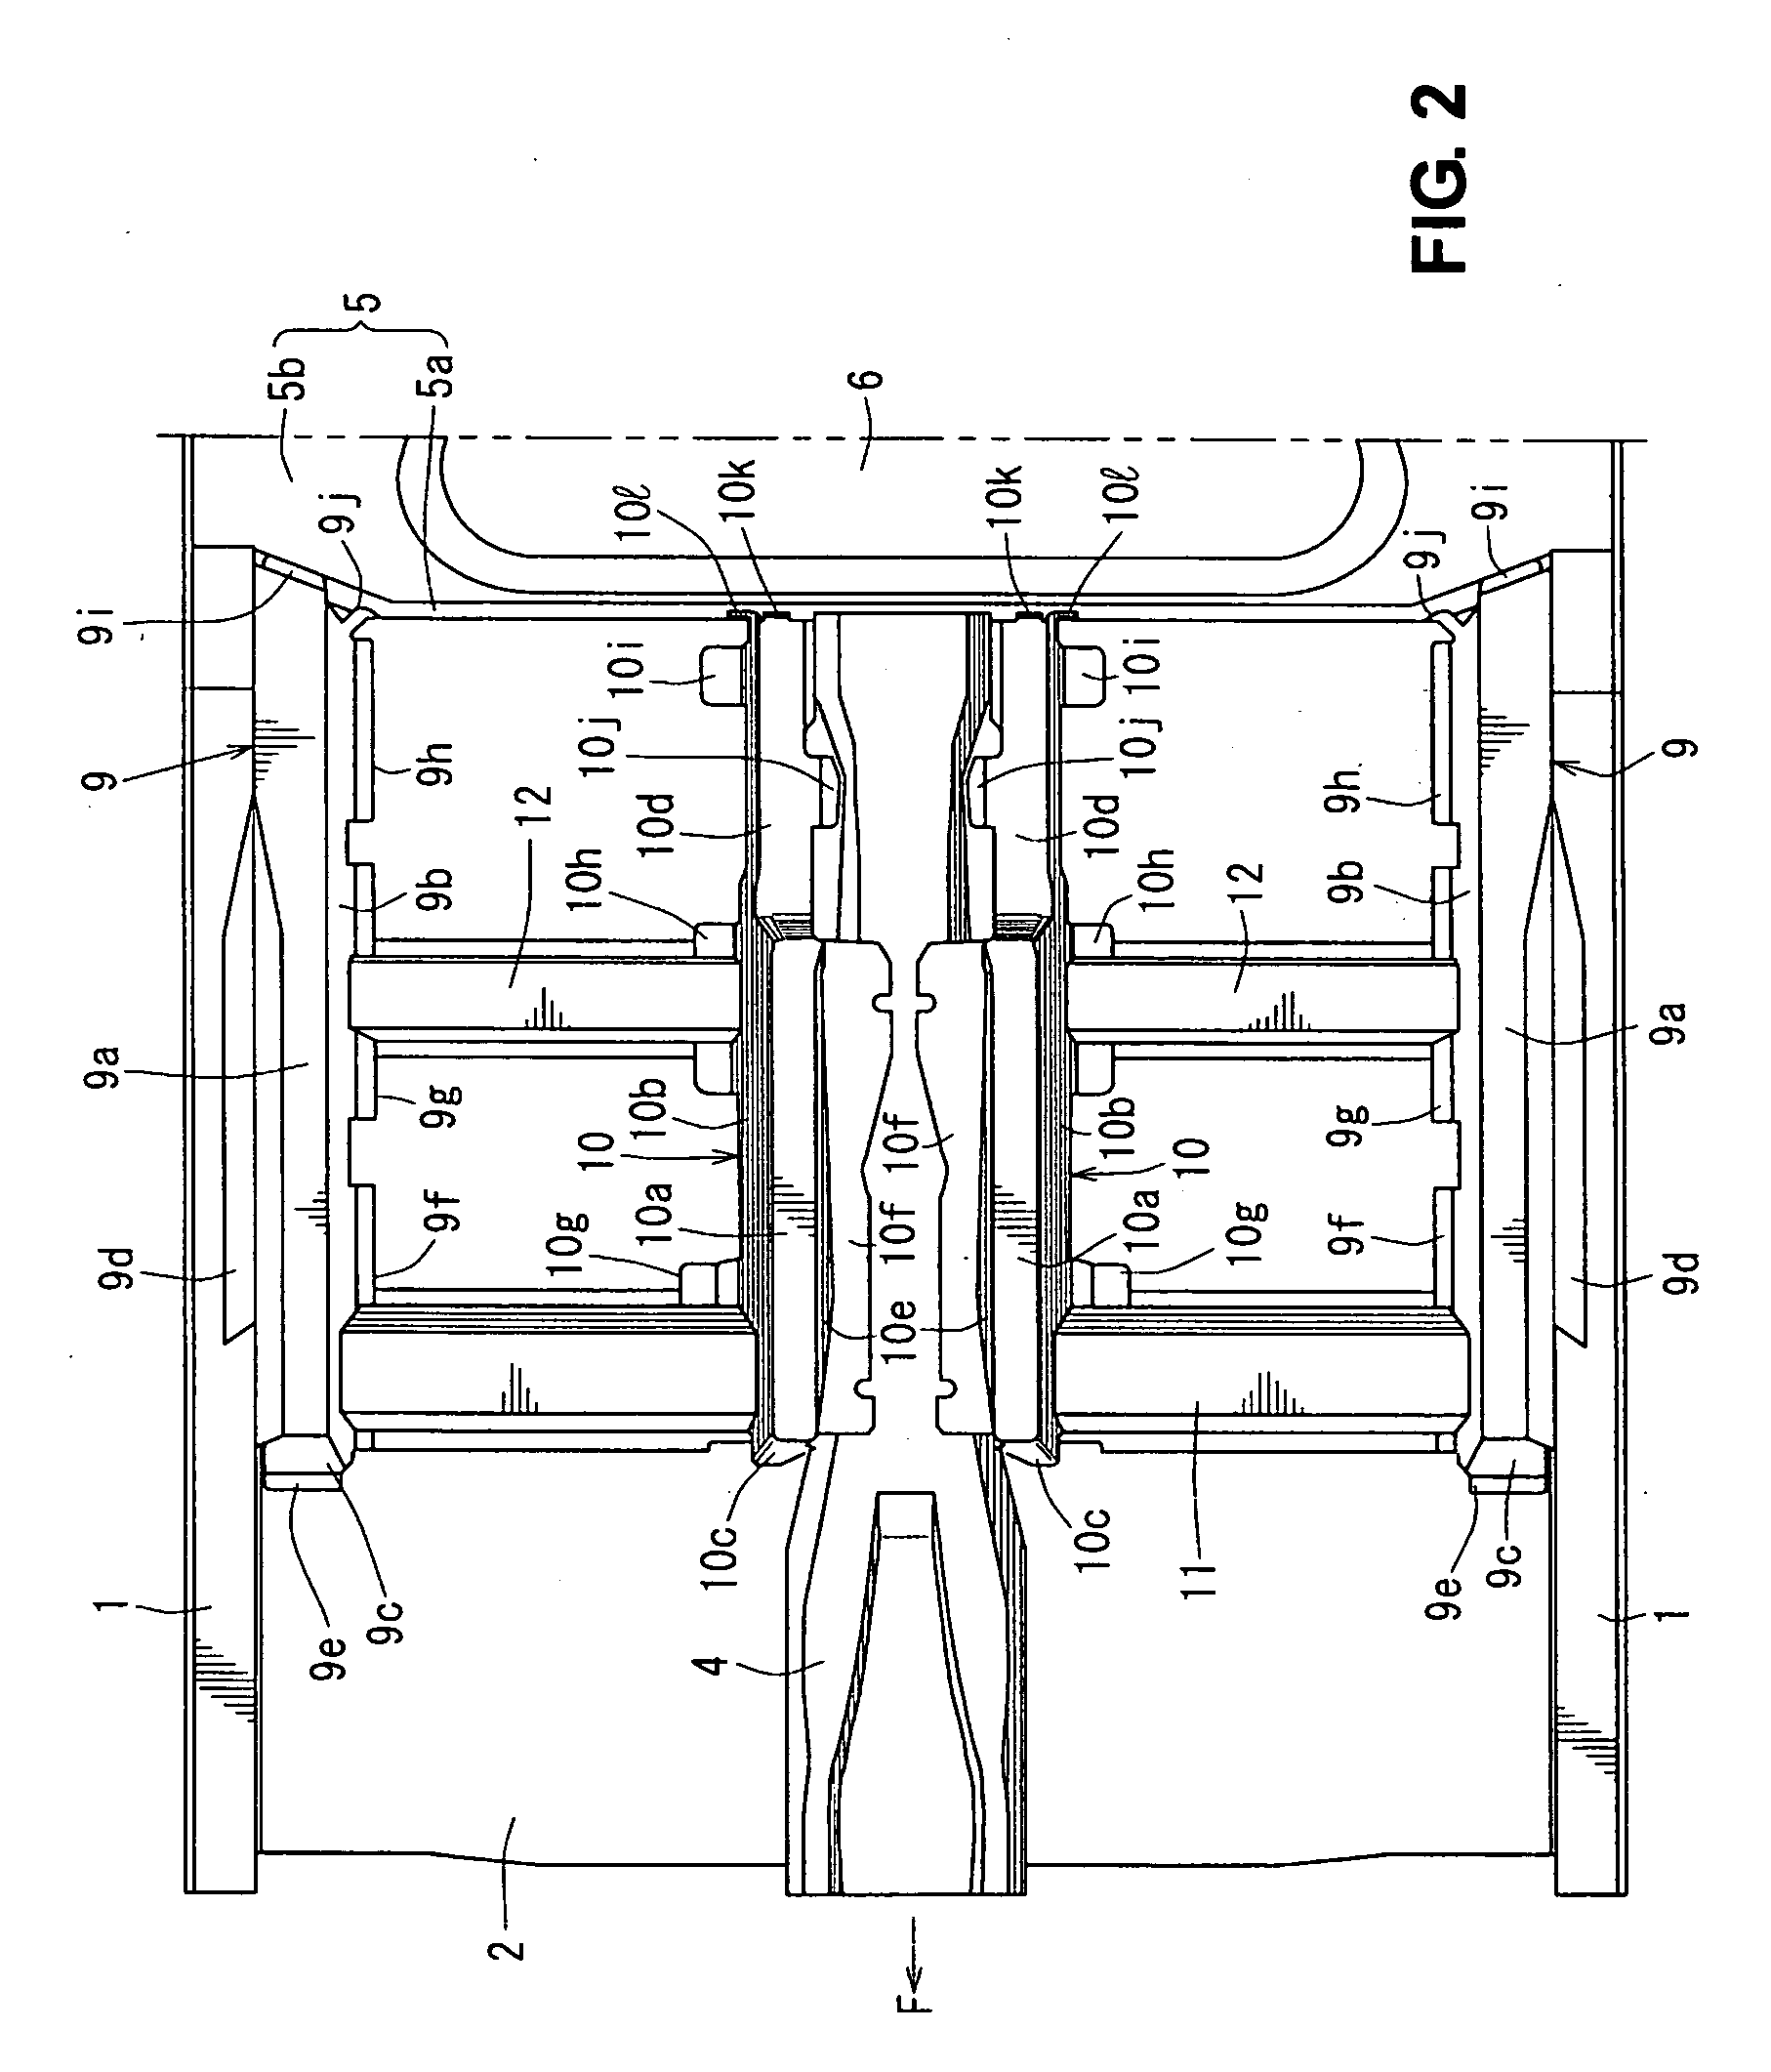 Lower vehicle body structure of vehicle